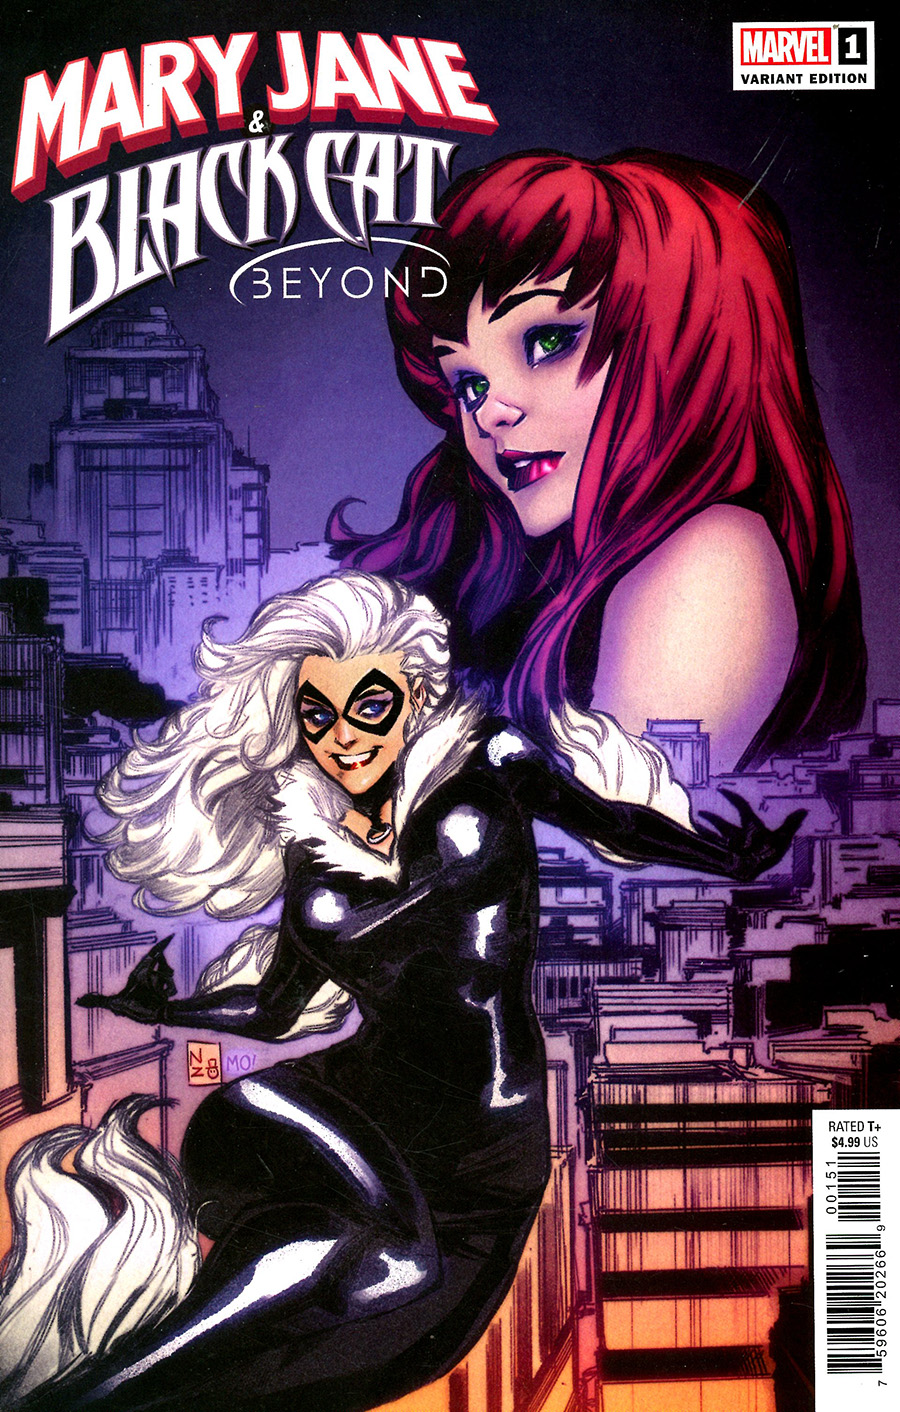 Mary Jane & Black Cat Beyond #1 (One Shot) Cover F Incentive Nabetse Zitro Variant Cover